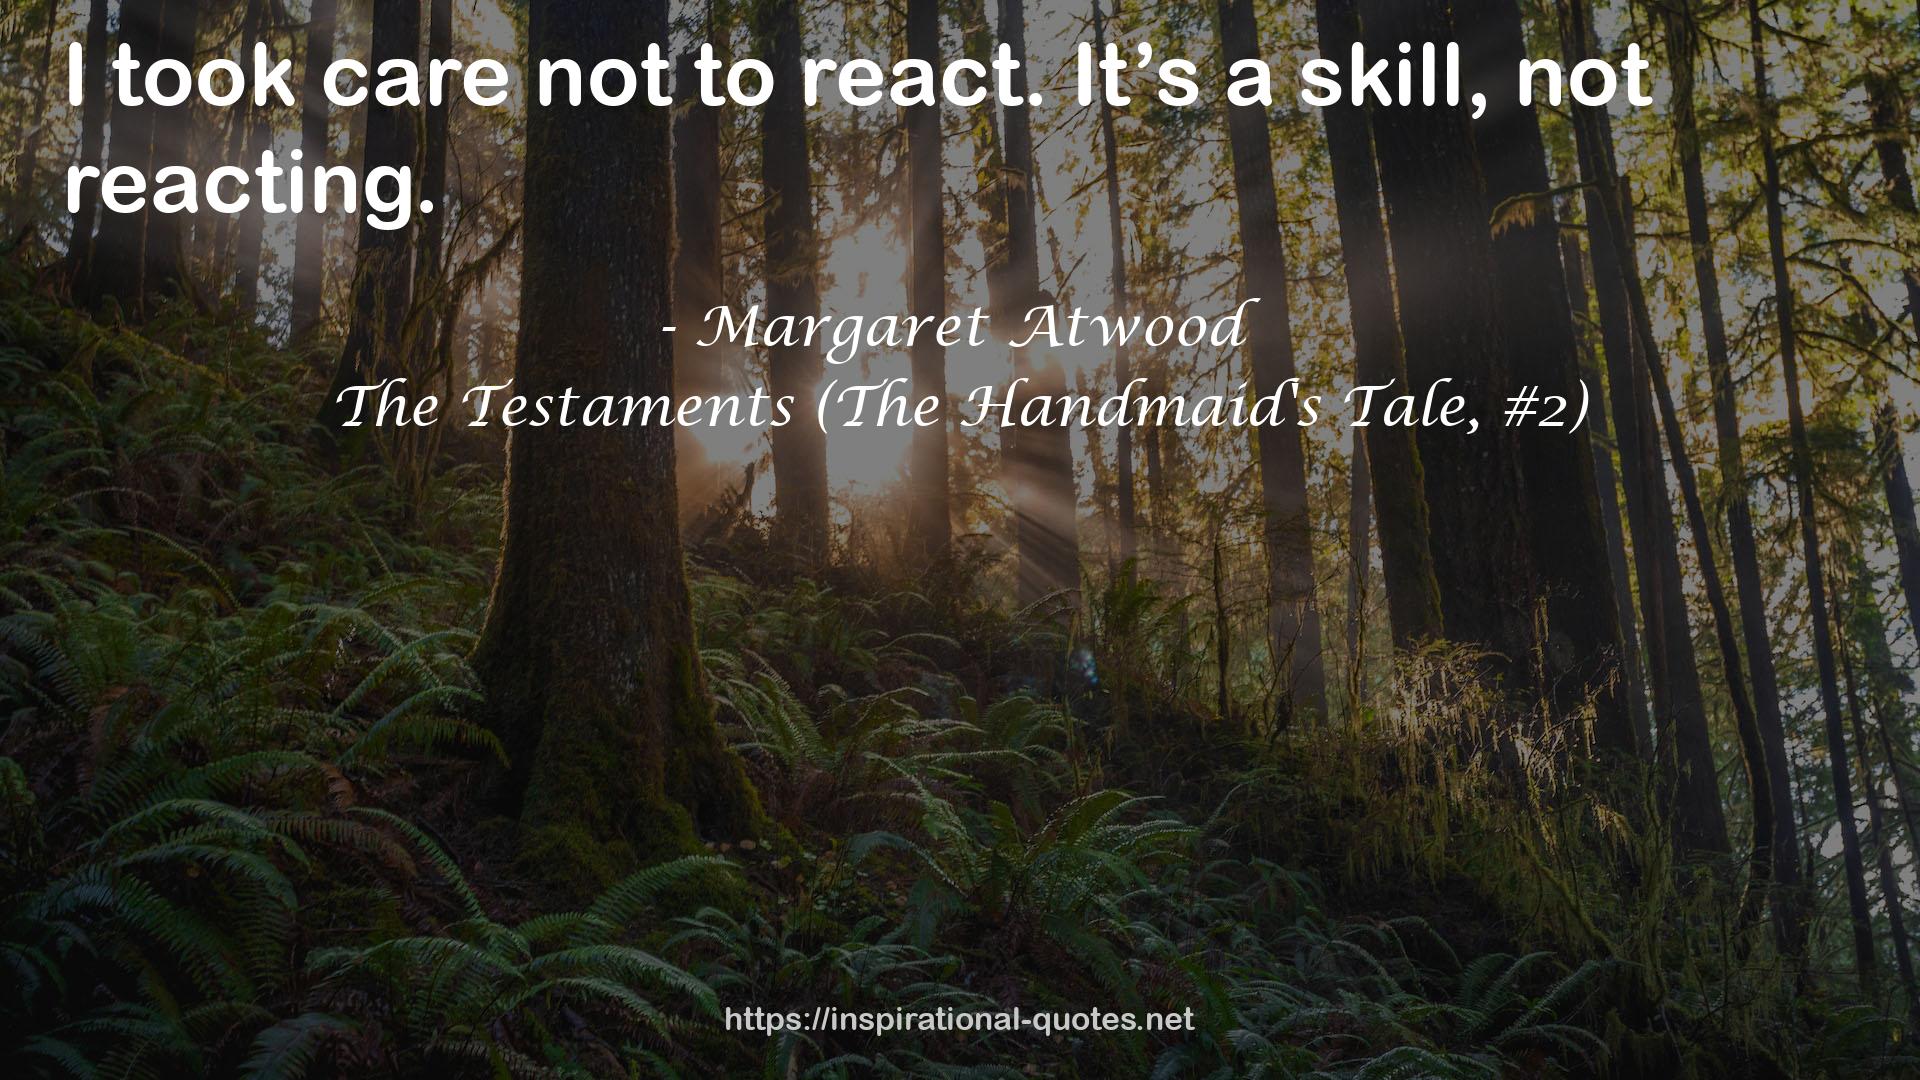 The Testaments (The Handmaid's Tale, #2) QUOTES